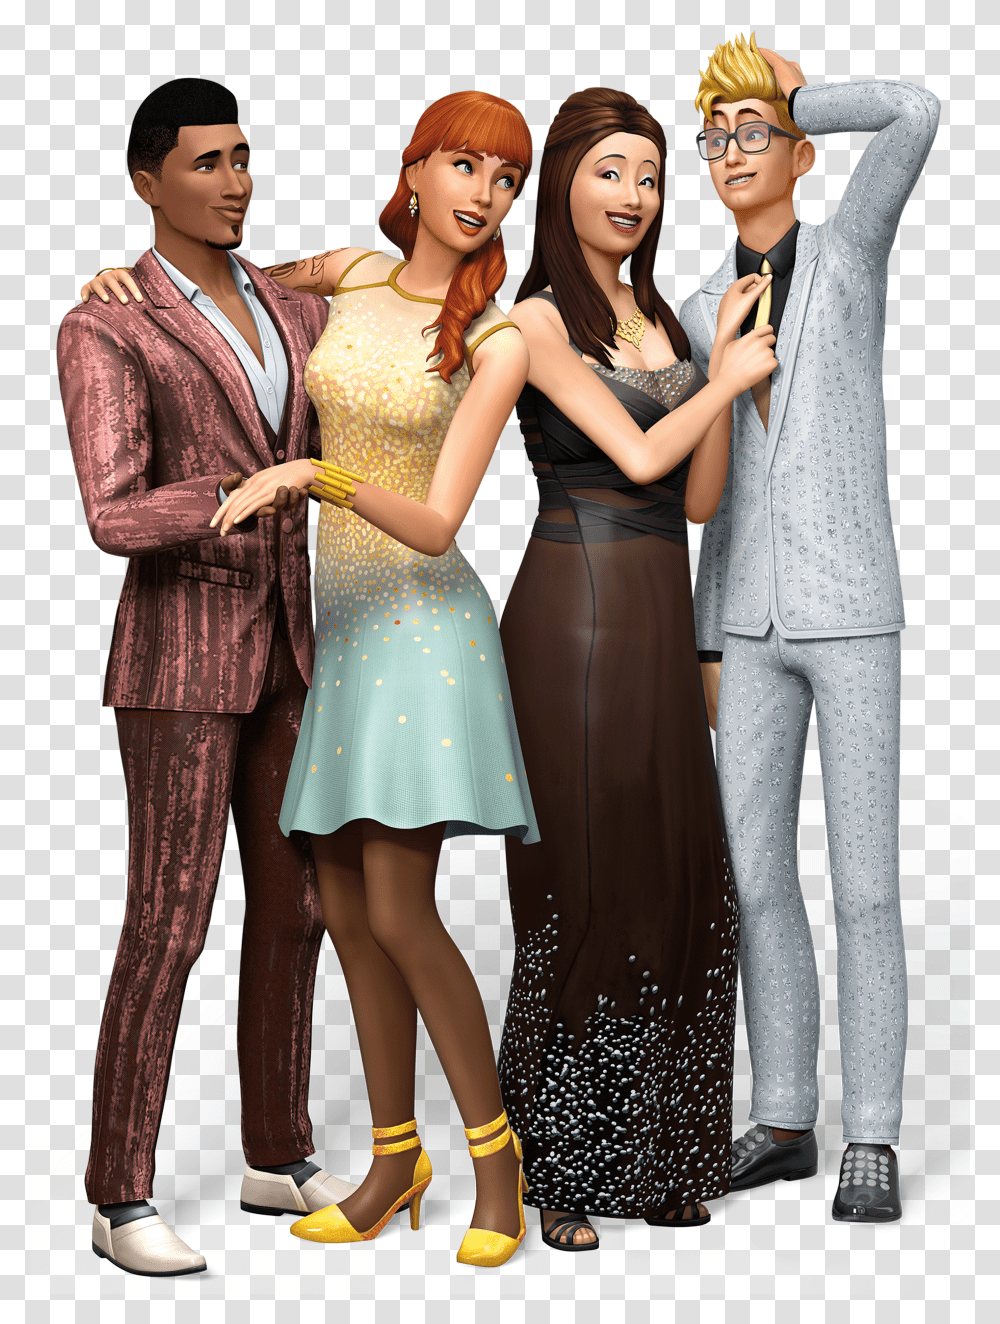 Sims 4 Luxury Party Stuff Transparent Png